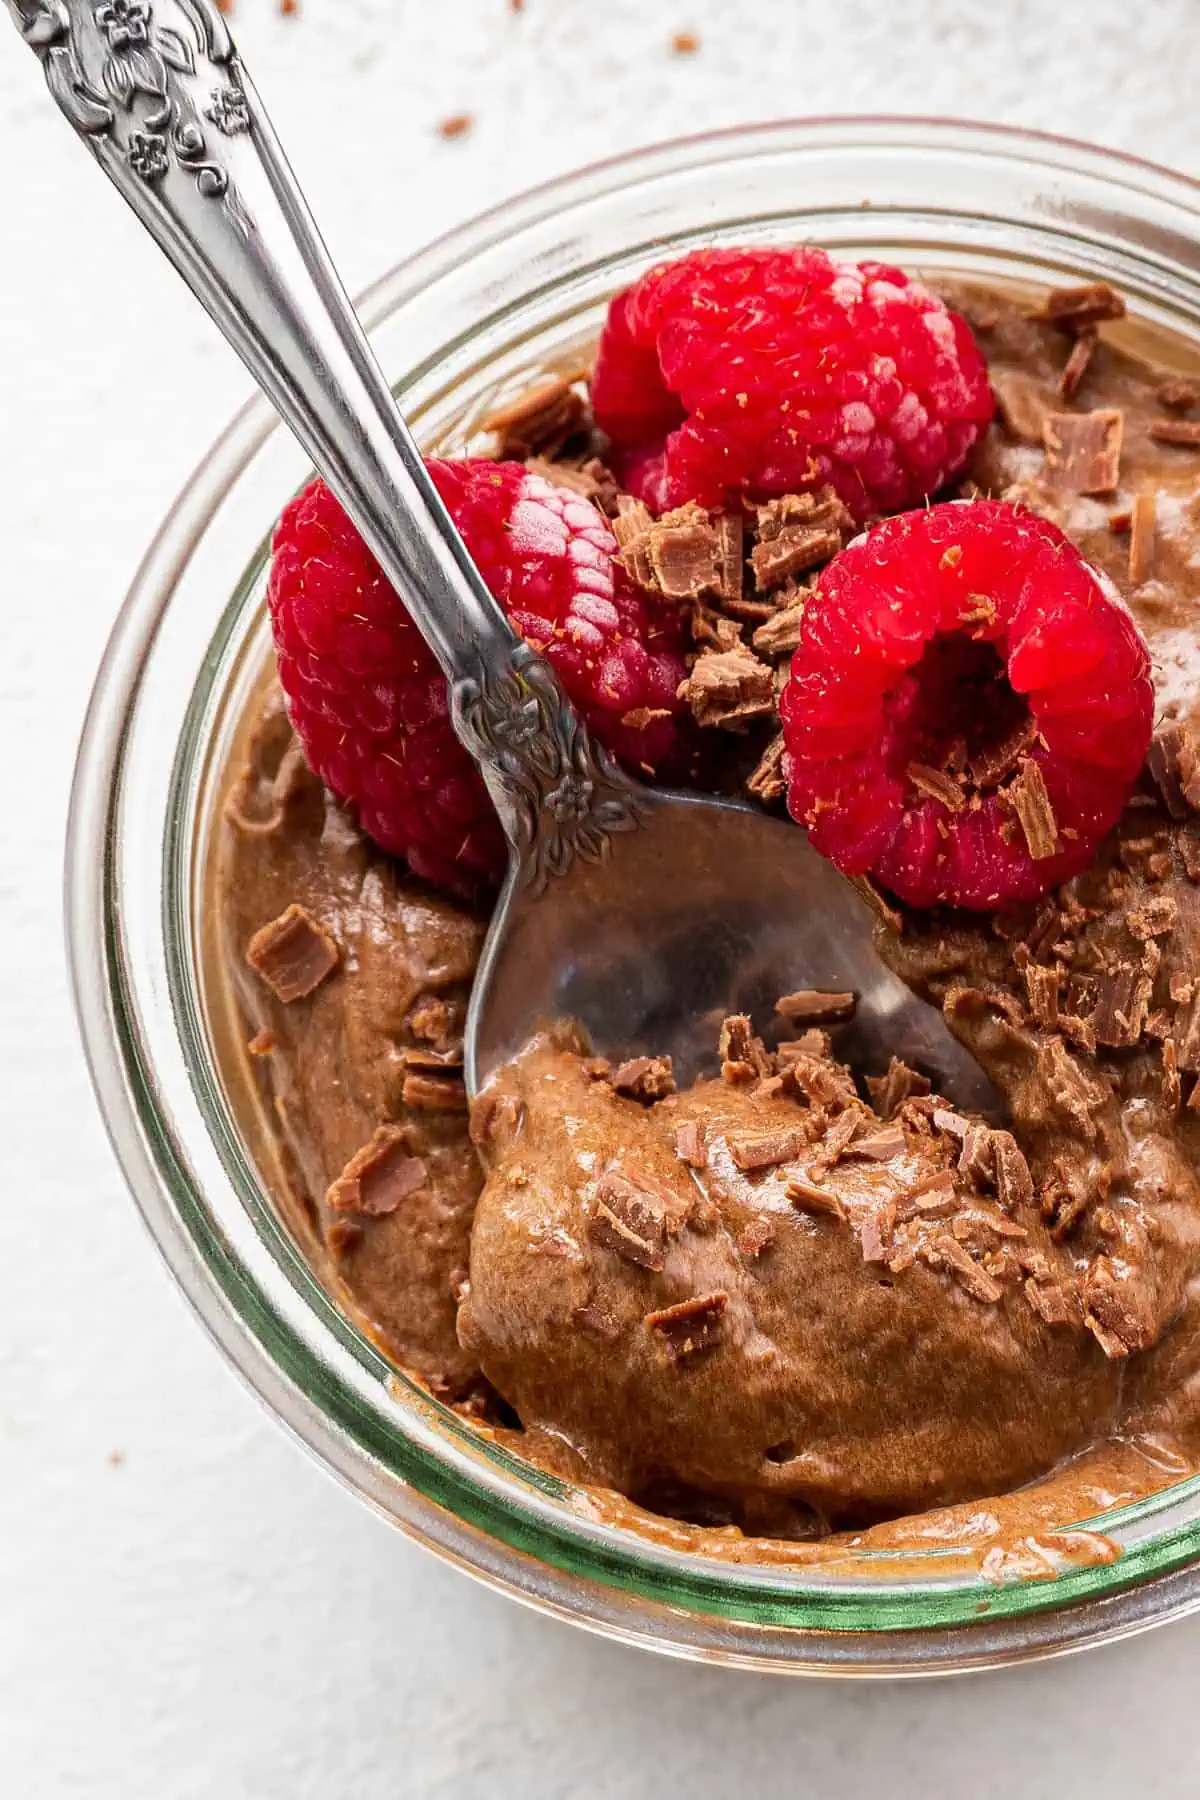 A spoon dipping into a cup of chocolate avocado mousse topped with raspberries